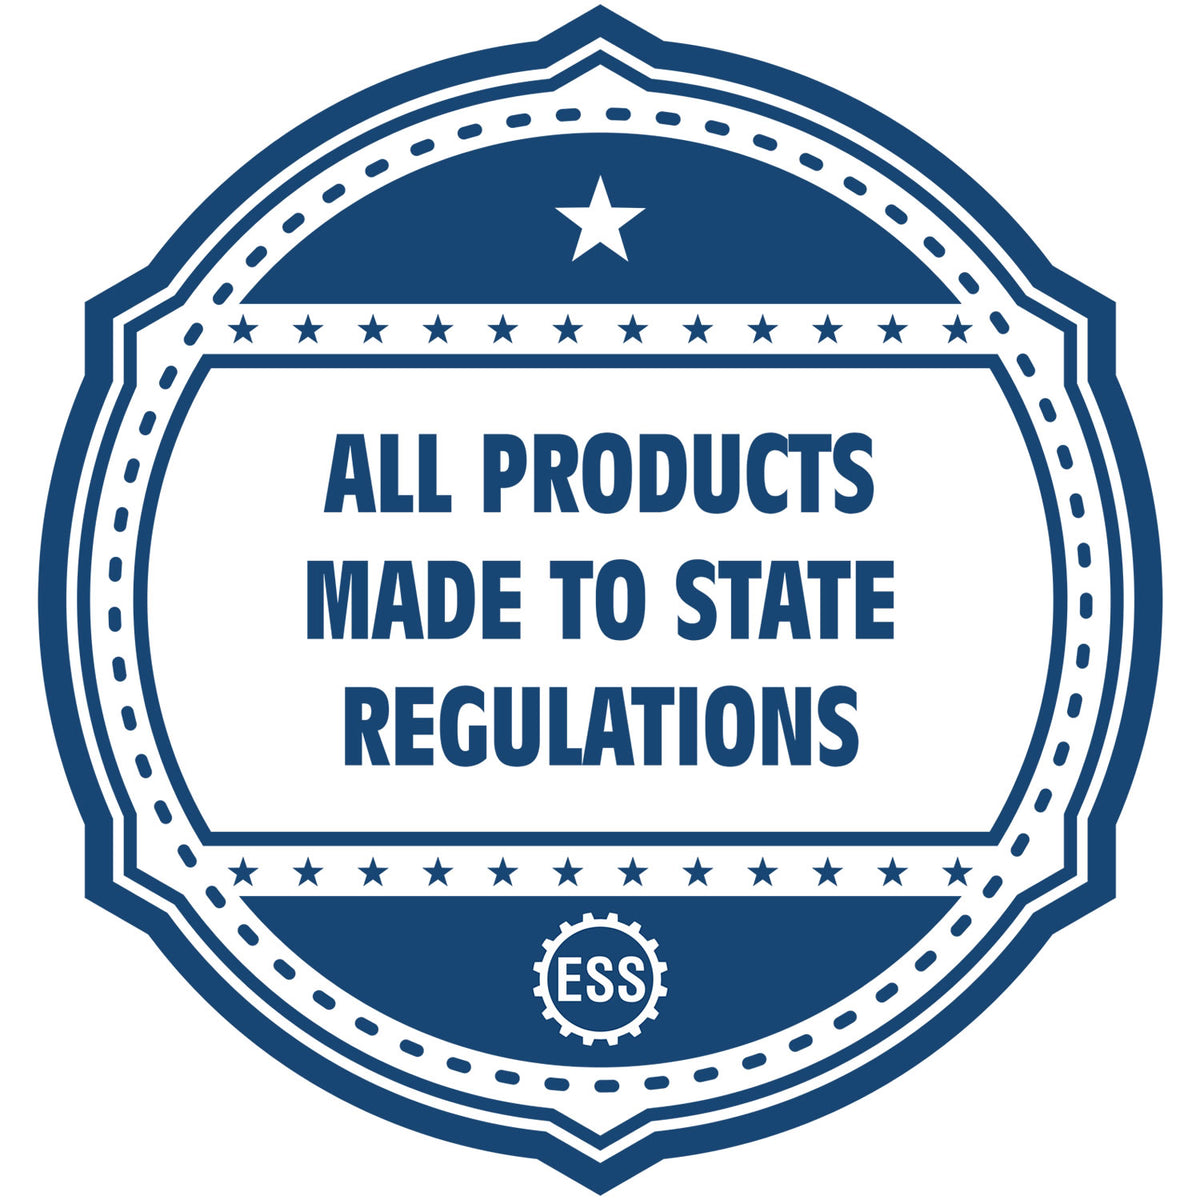 An icon or badge element for the State of North Dakota Soft Land Surveyor Embossing Seal showing that this product is made in compliance with state regulations.